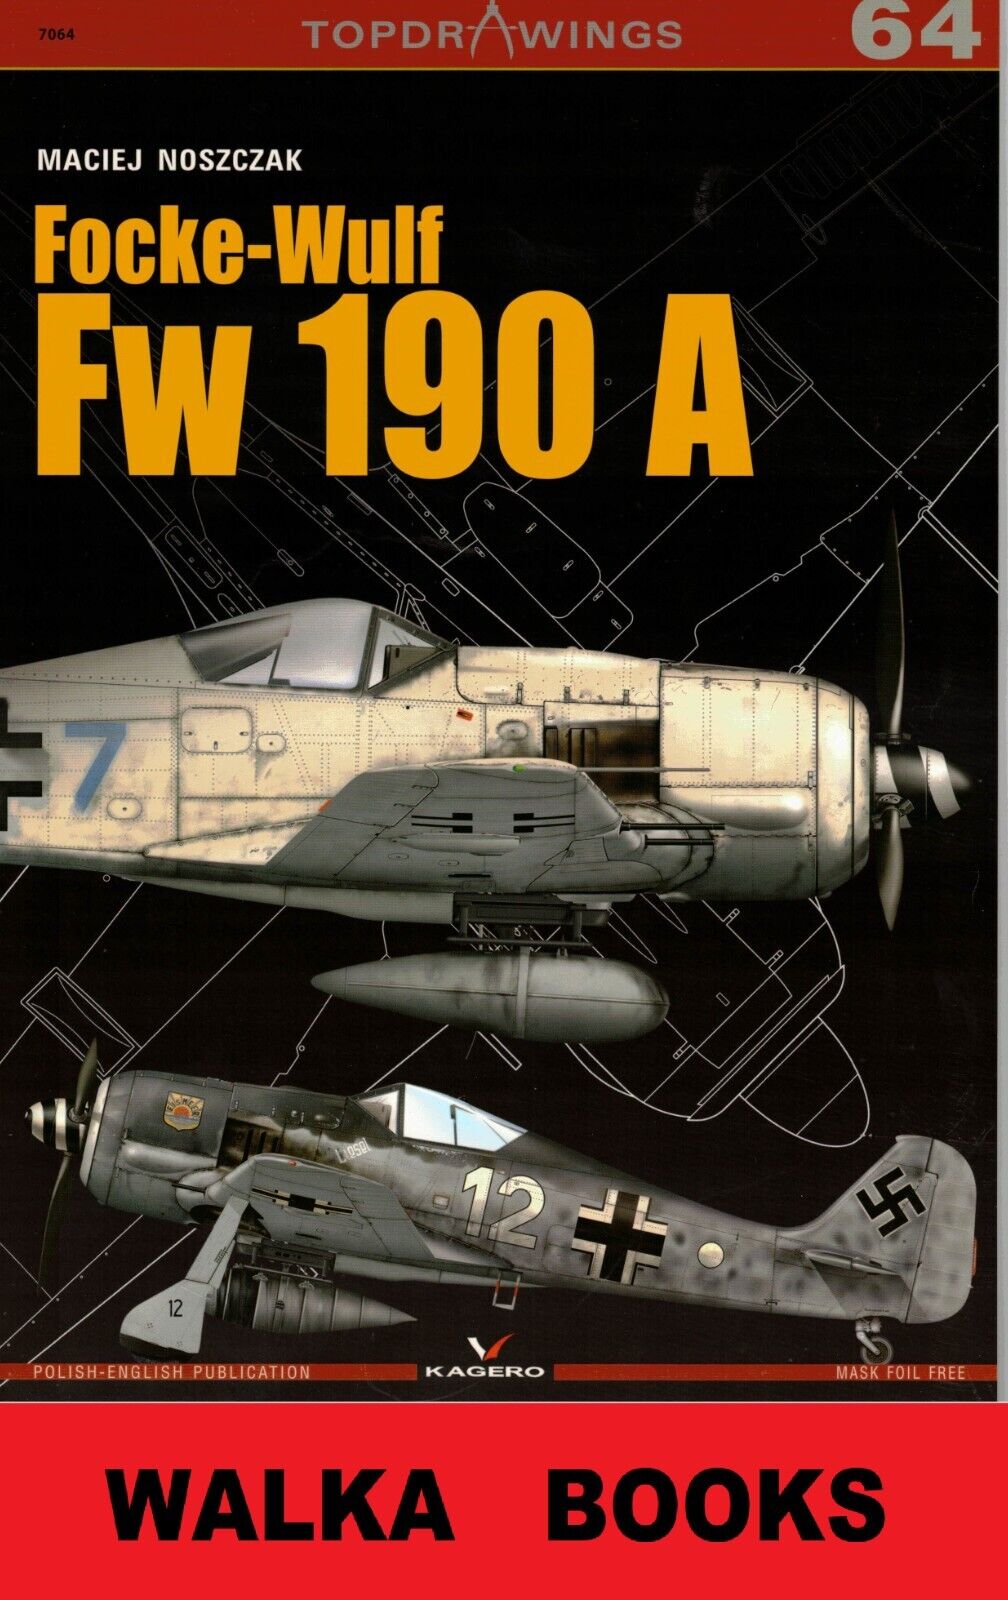 Focke-Wulf 190 A - Kagero Topdrawings 64 - Combined Shipping - BRAND NEW